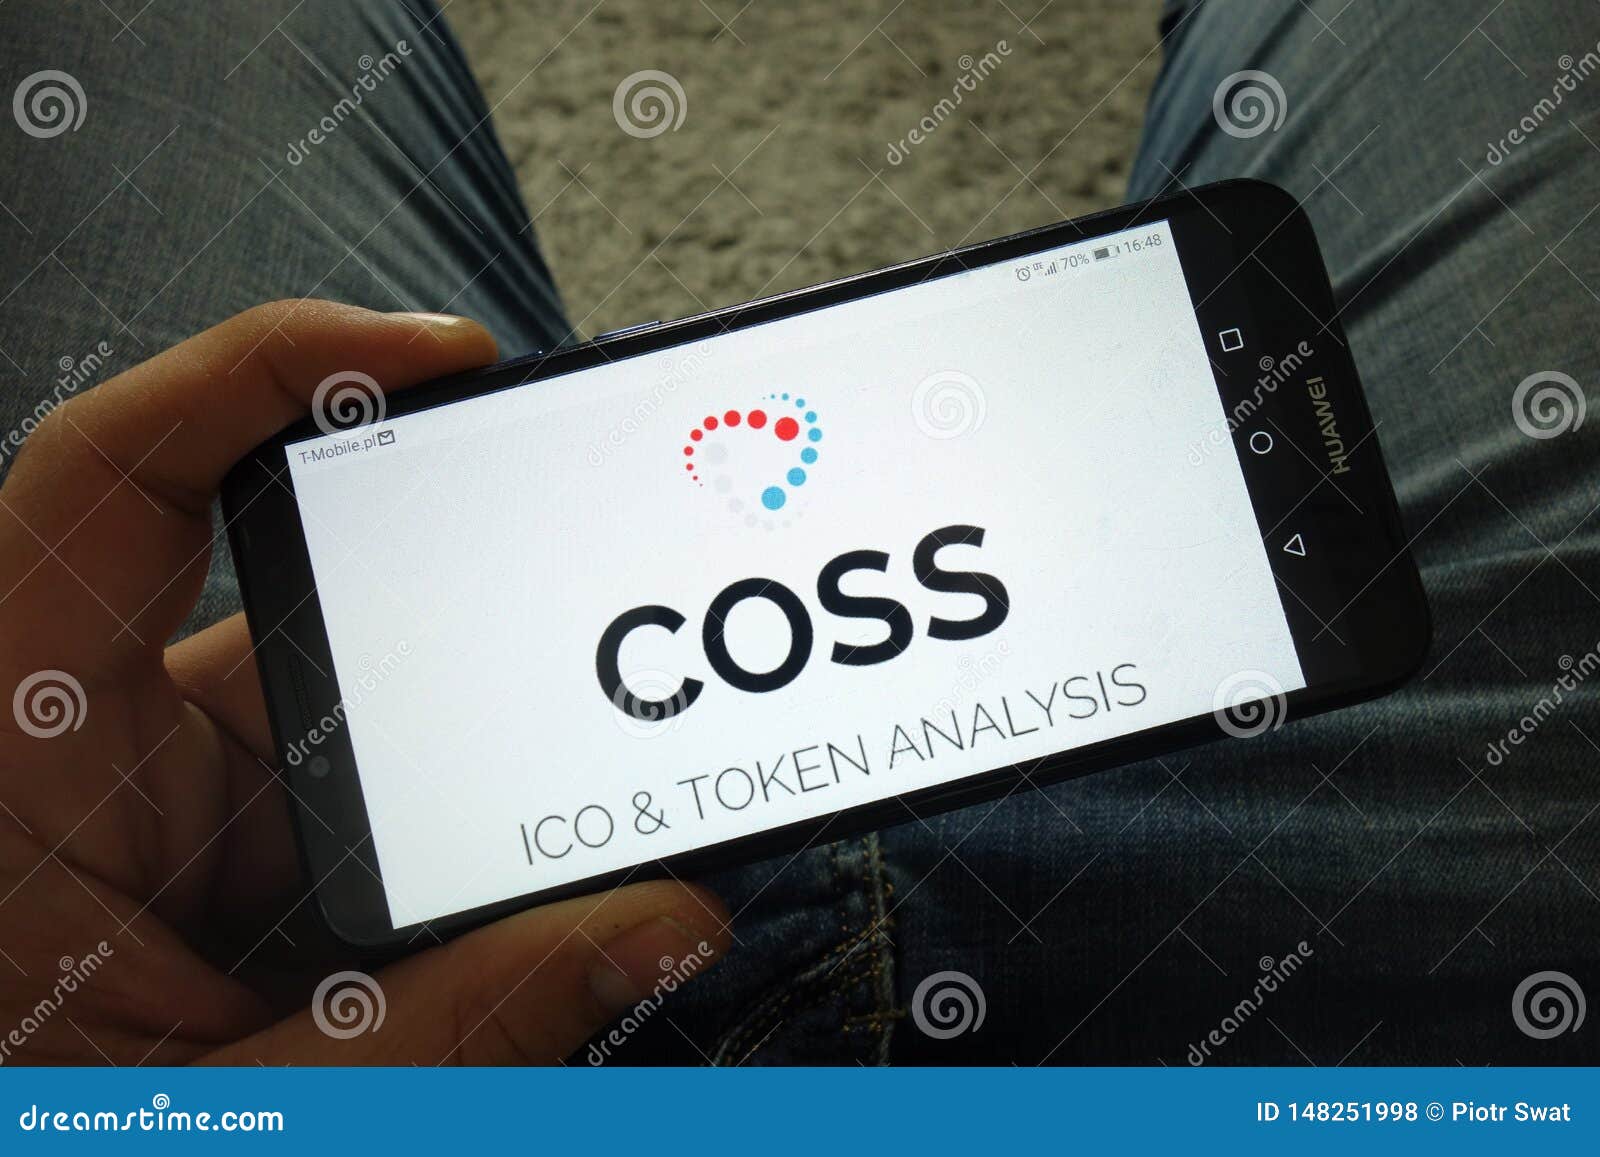 Man Holding Smartphone With COSS Cryptocurrency Exchange ...